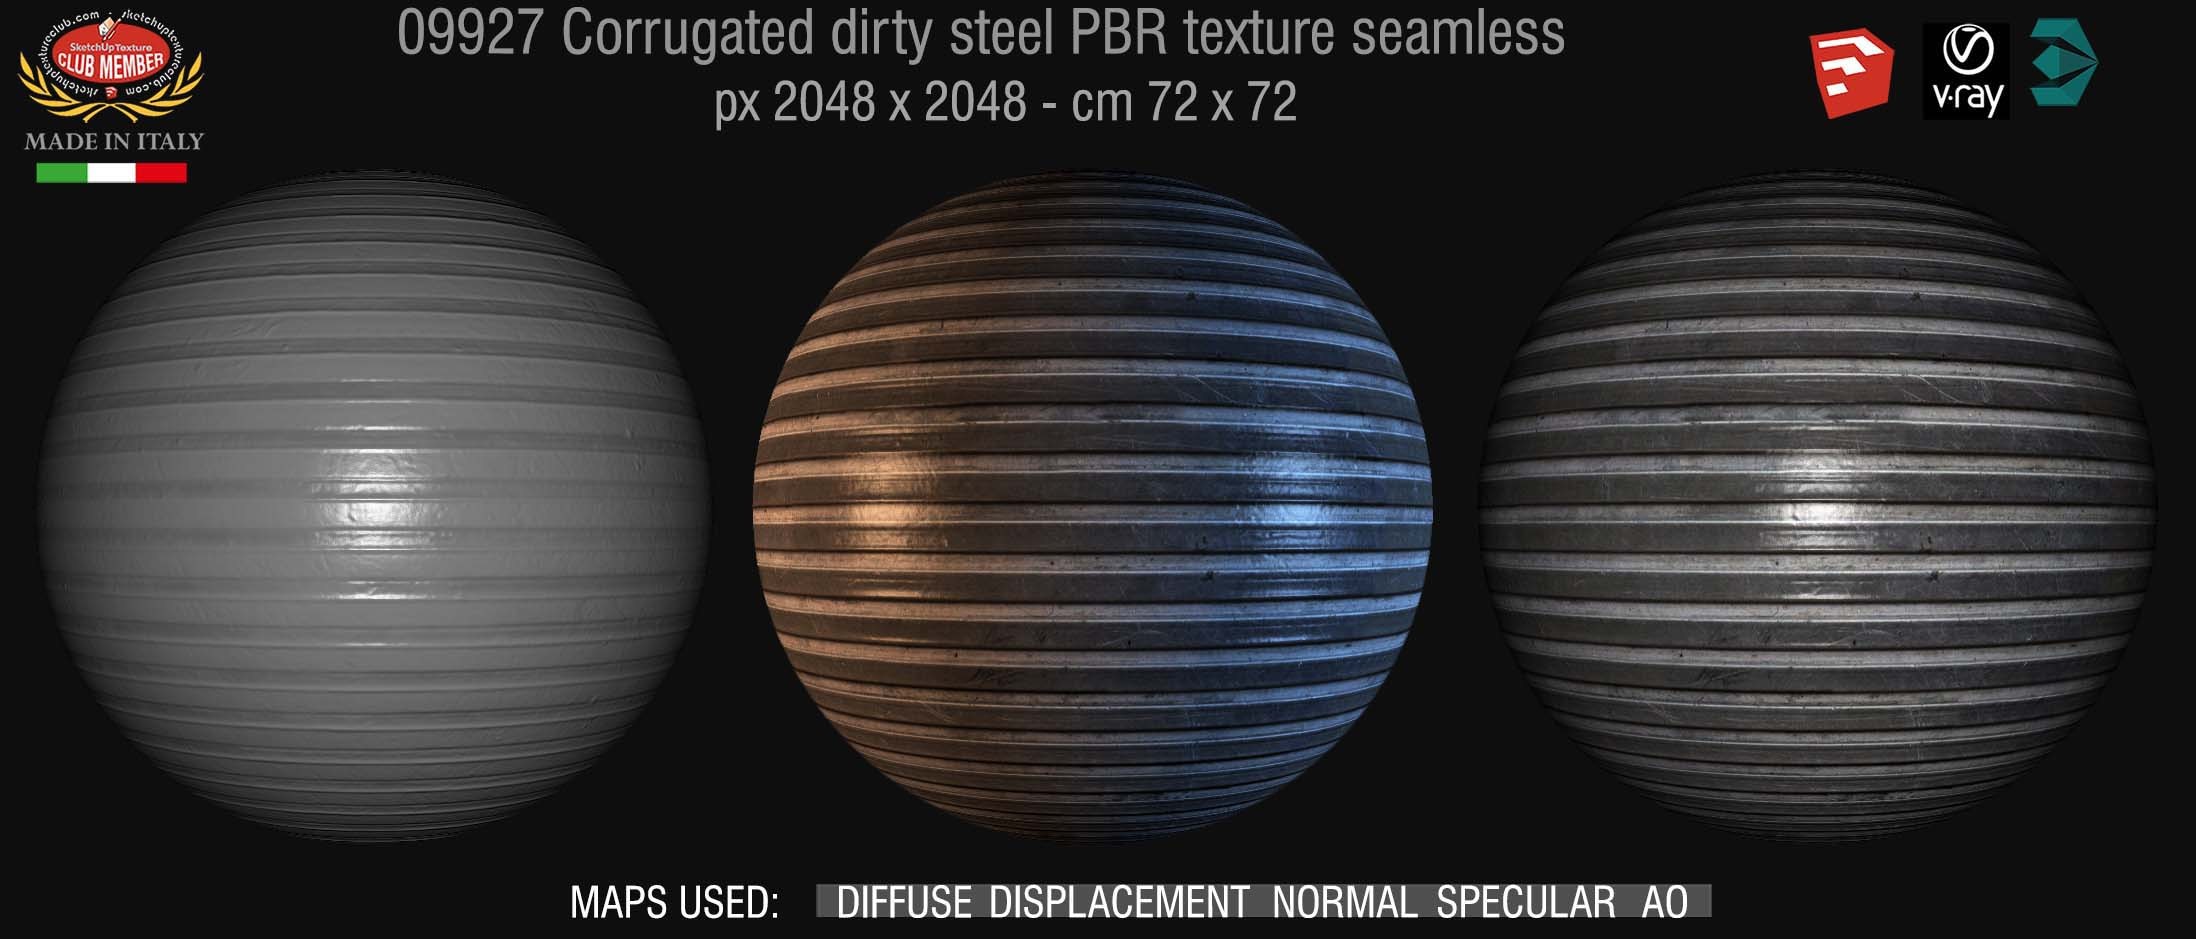 09927 Corrugated dirty steel PBR texture seamless DEMO